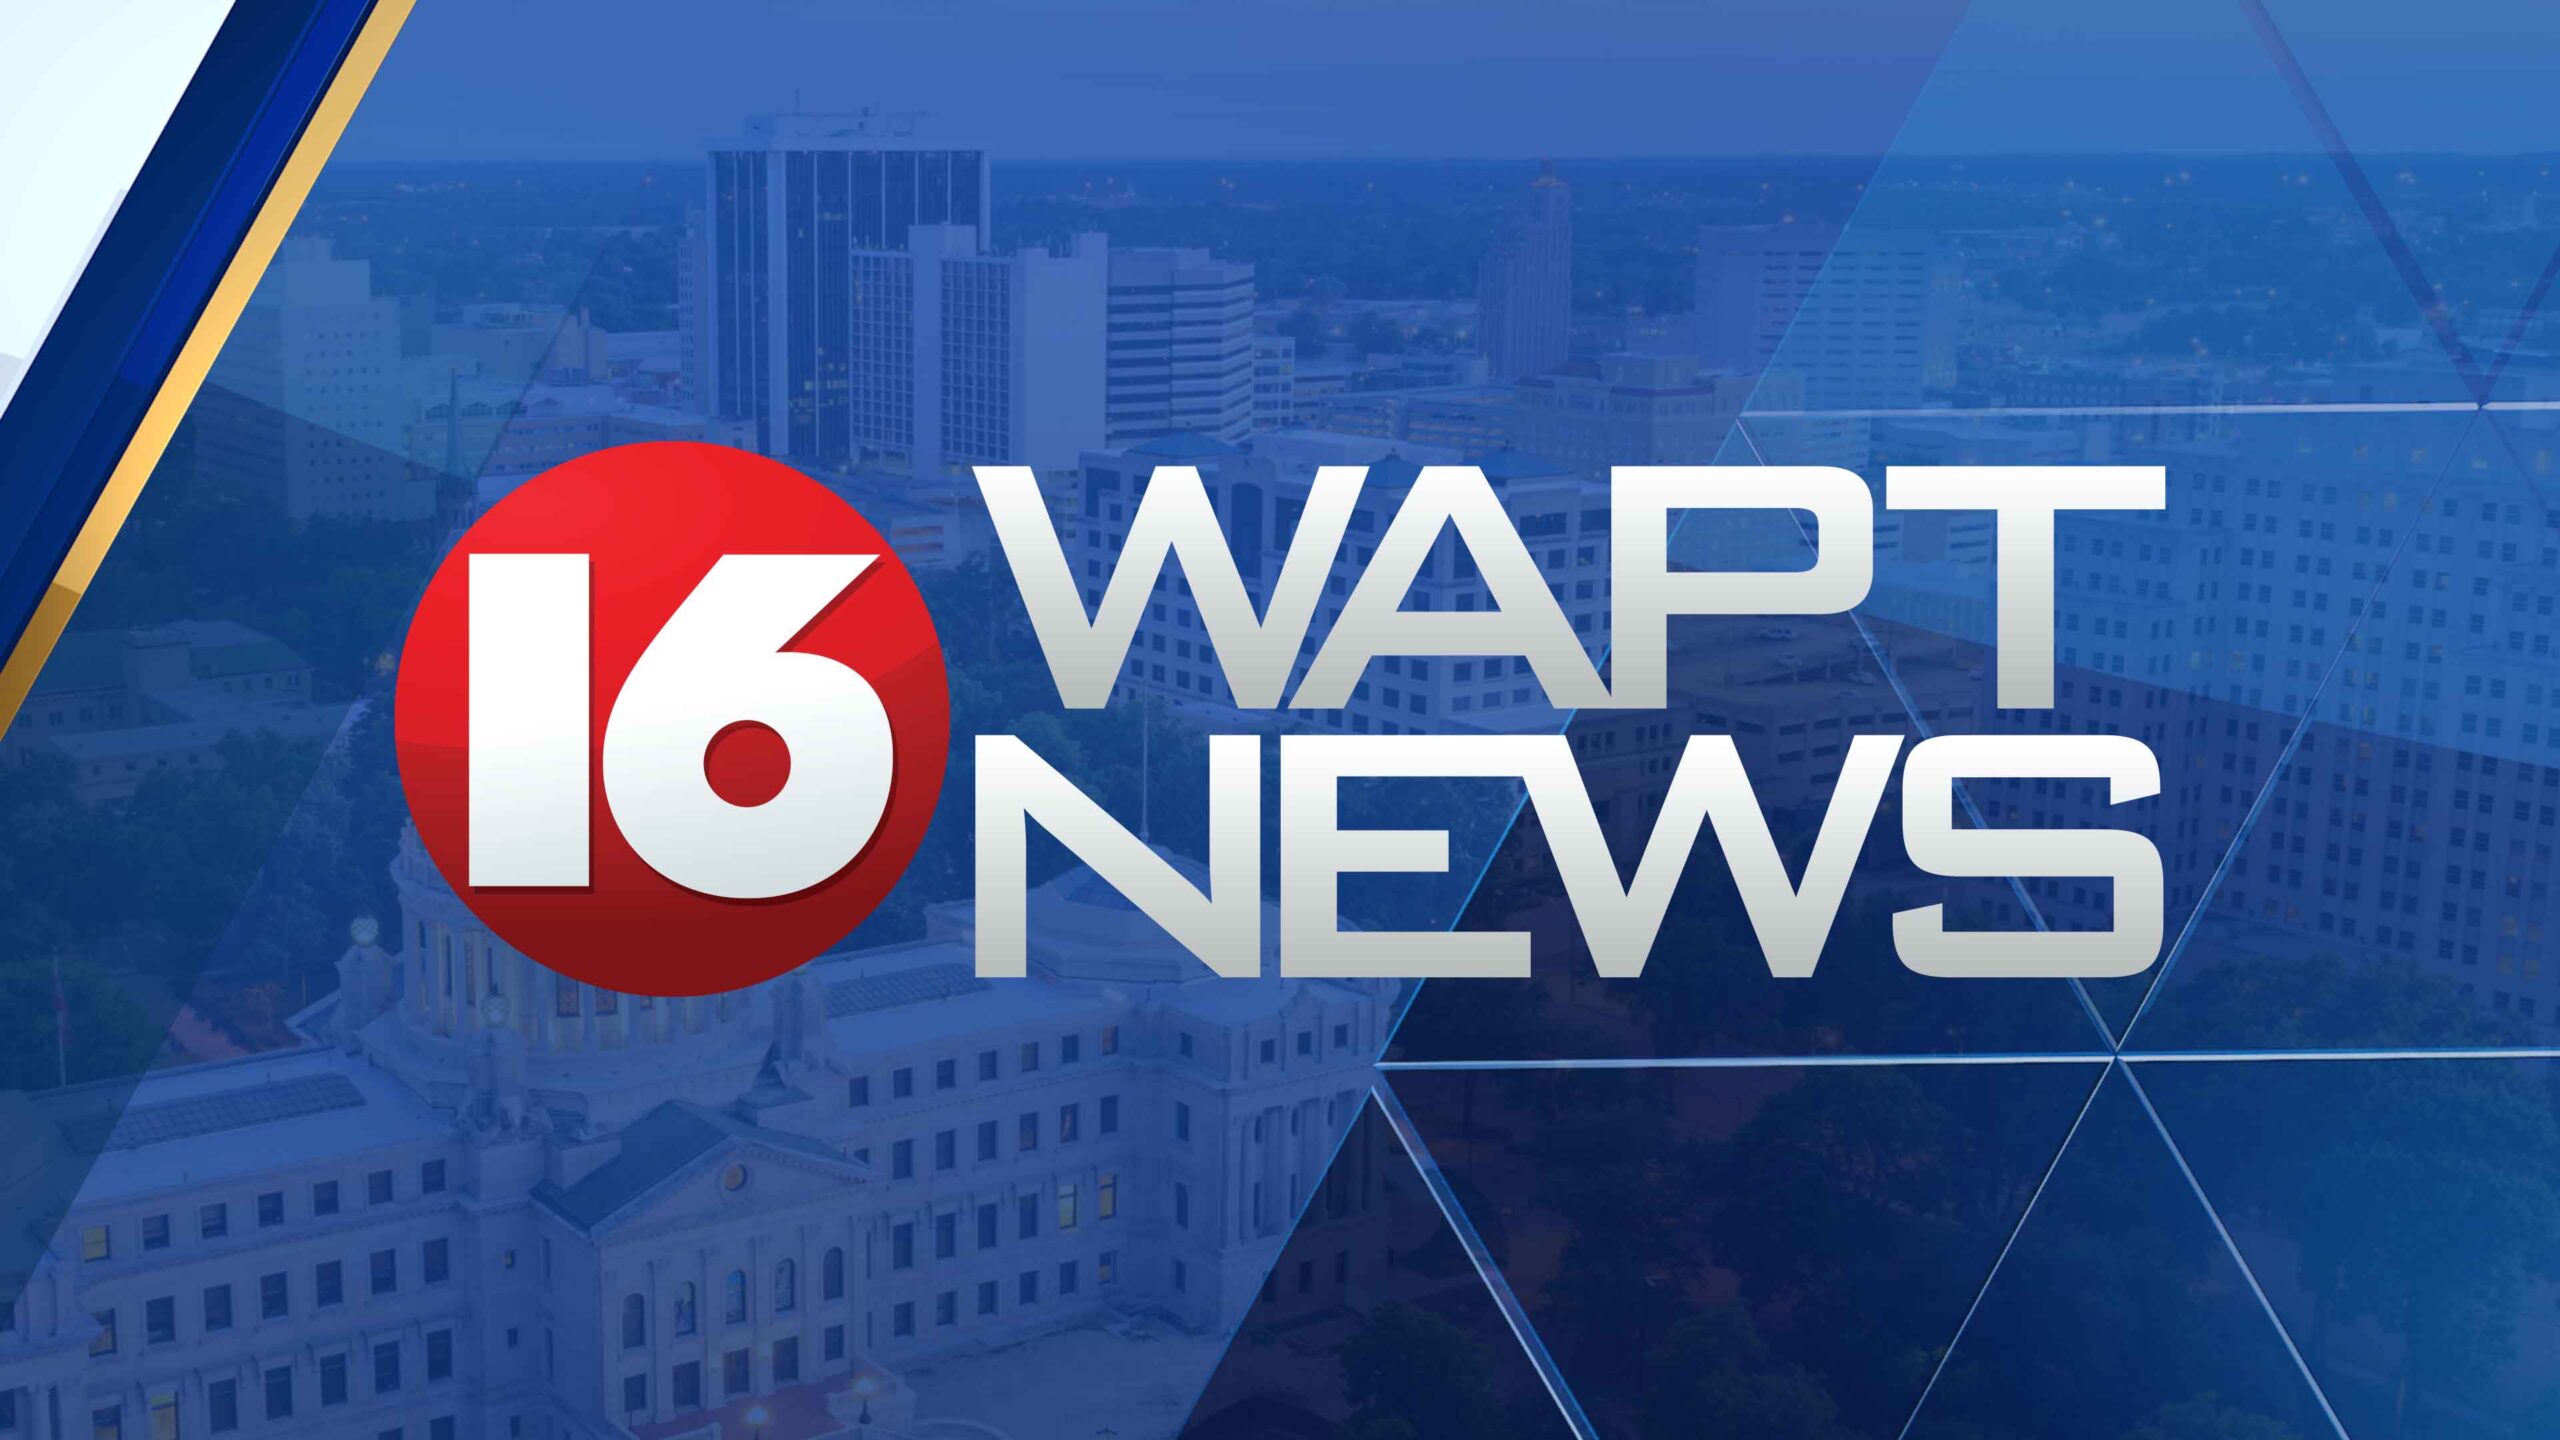 WAPT news and weather streaming free